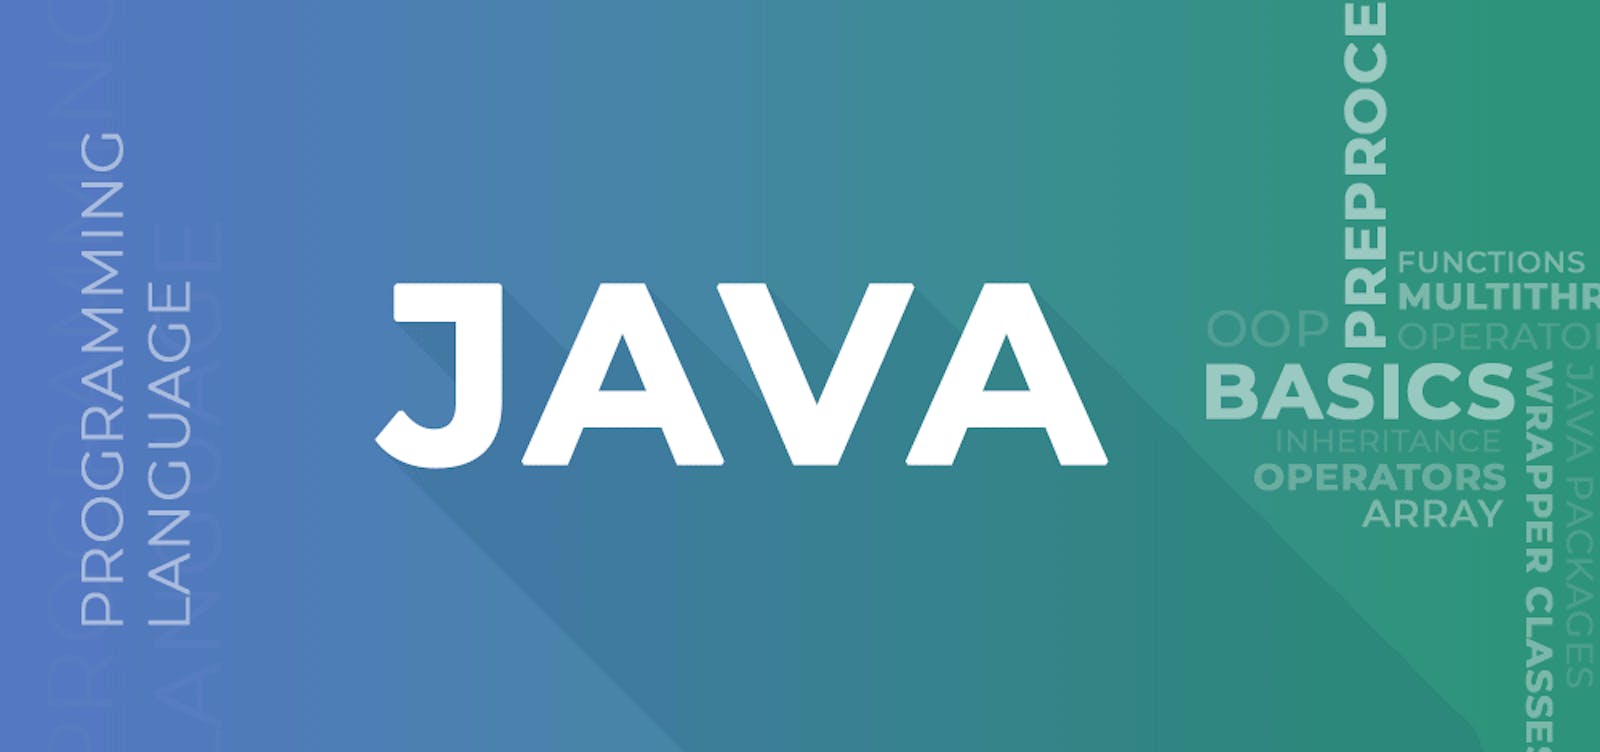 Java Training for Beginners: Essential Tips and Tricks